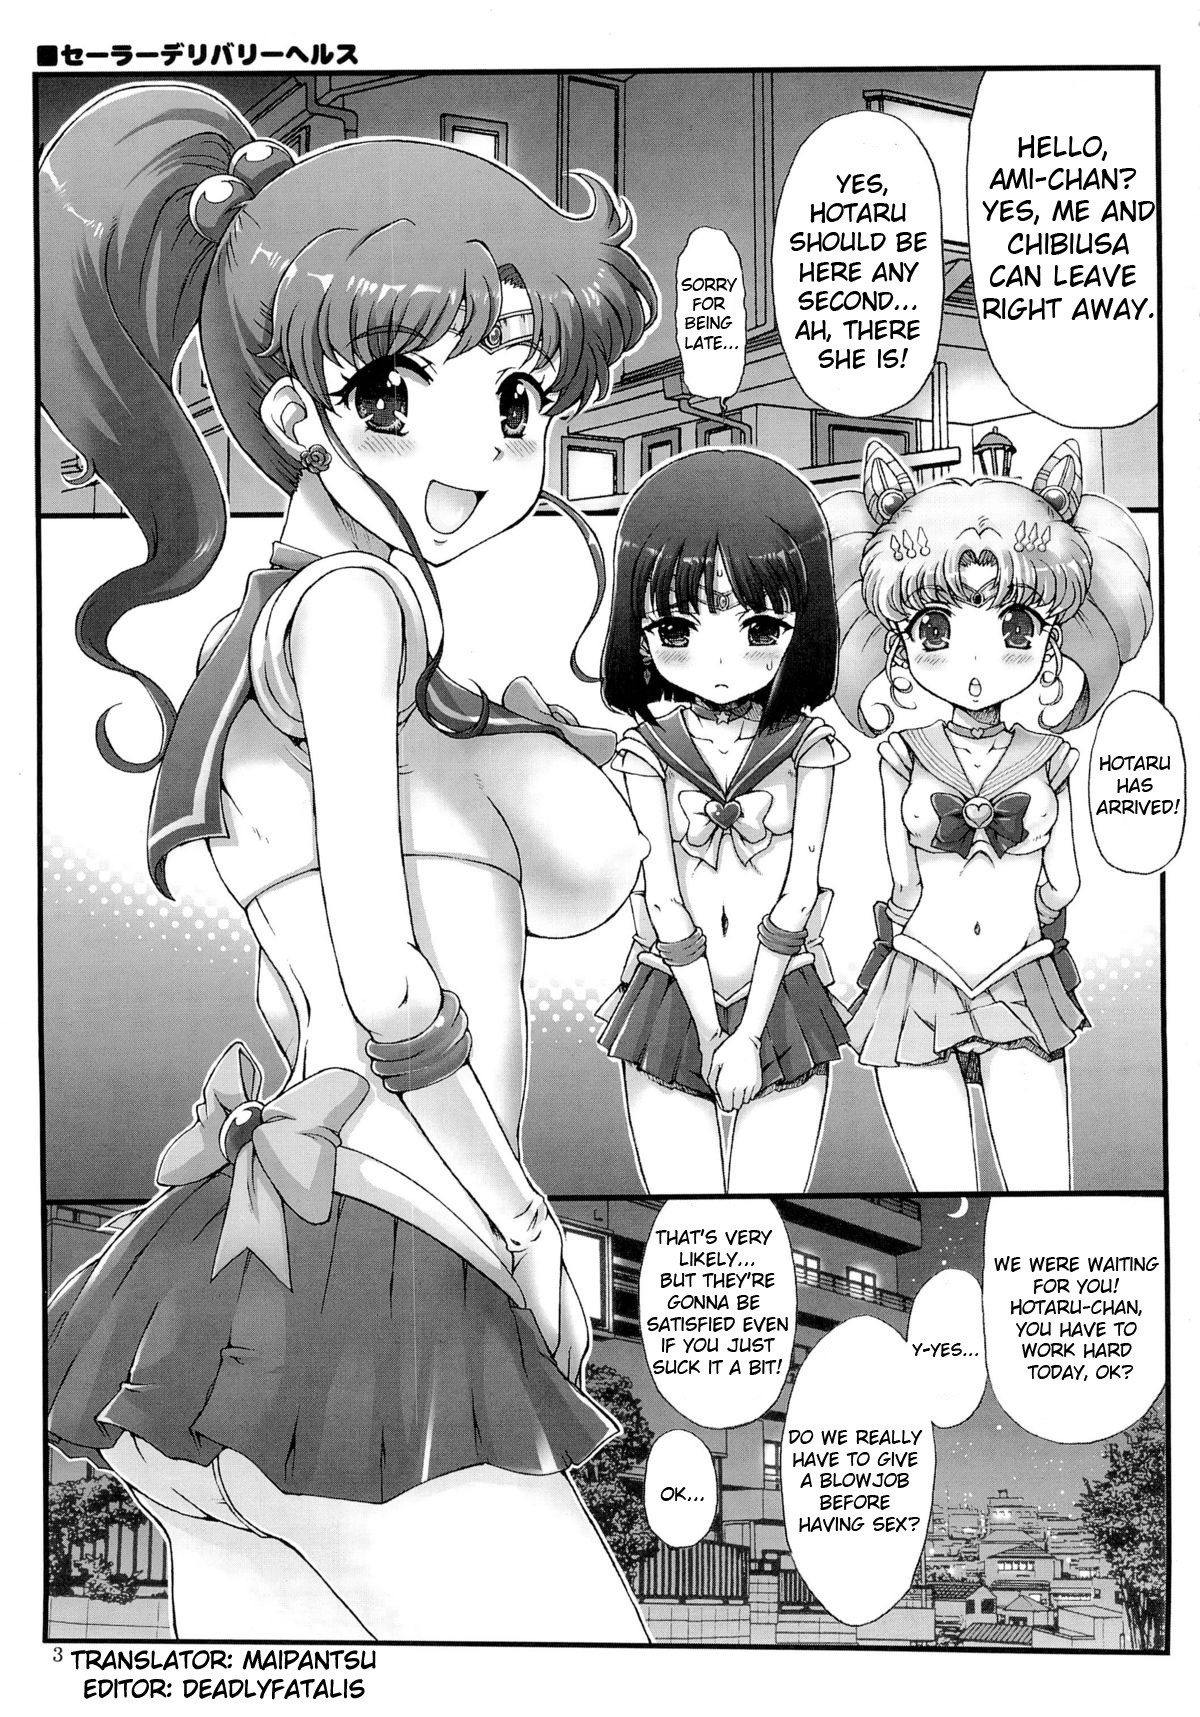 Sailor Delivery Health hentai manga picture 3